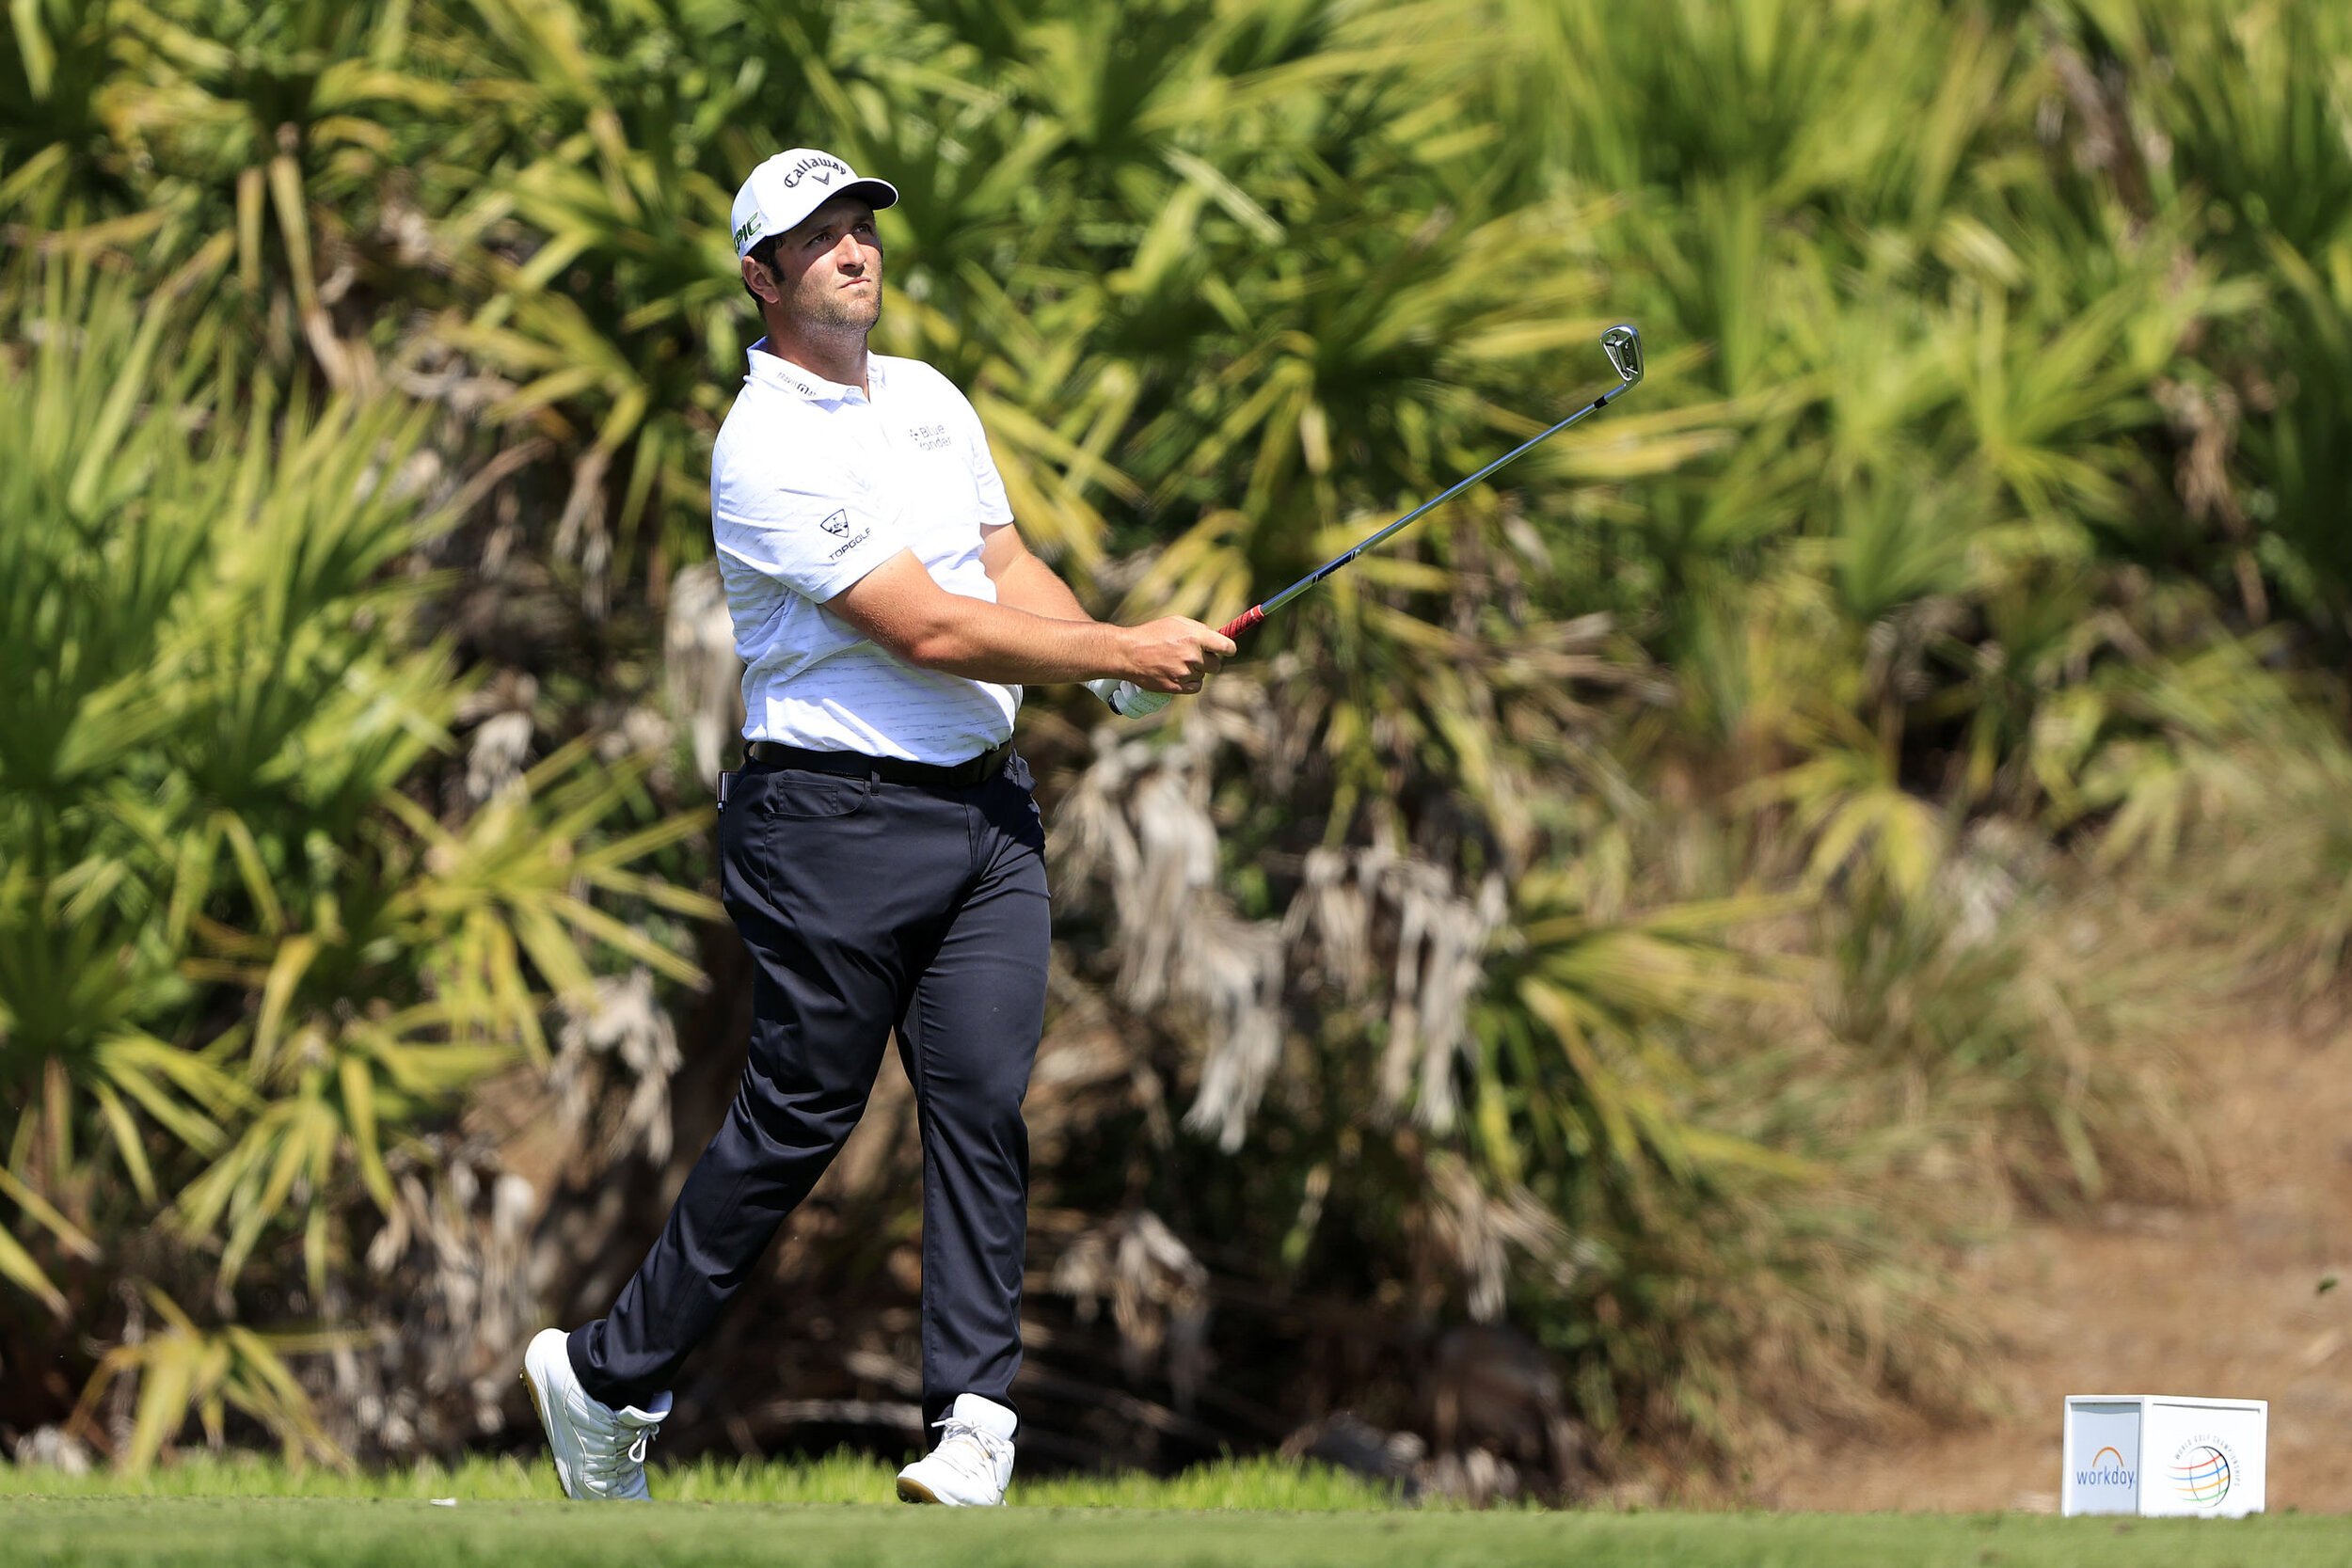  BRADENTON, FLORIDA - FEBRUARY 25: Jon Rahm of Spain plays his shot from the fourth tee during the first round of World Golf Championships-Workday Championship at The Concession on February 25, 2021 in Bradenton, Florida. (Photo by Sam Greenwood/Gett